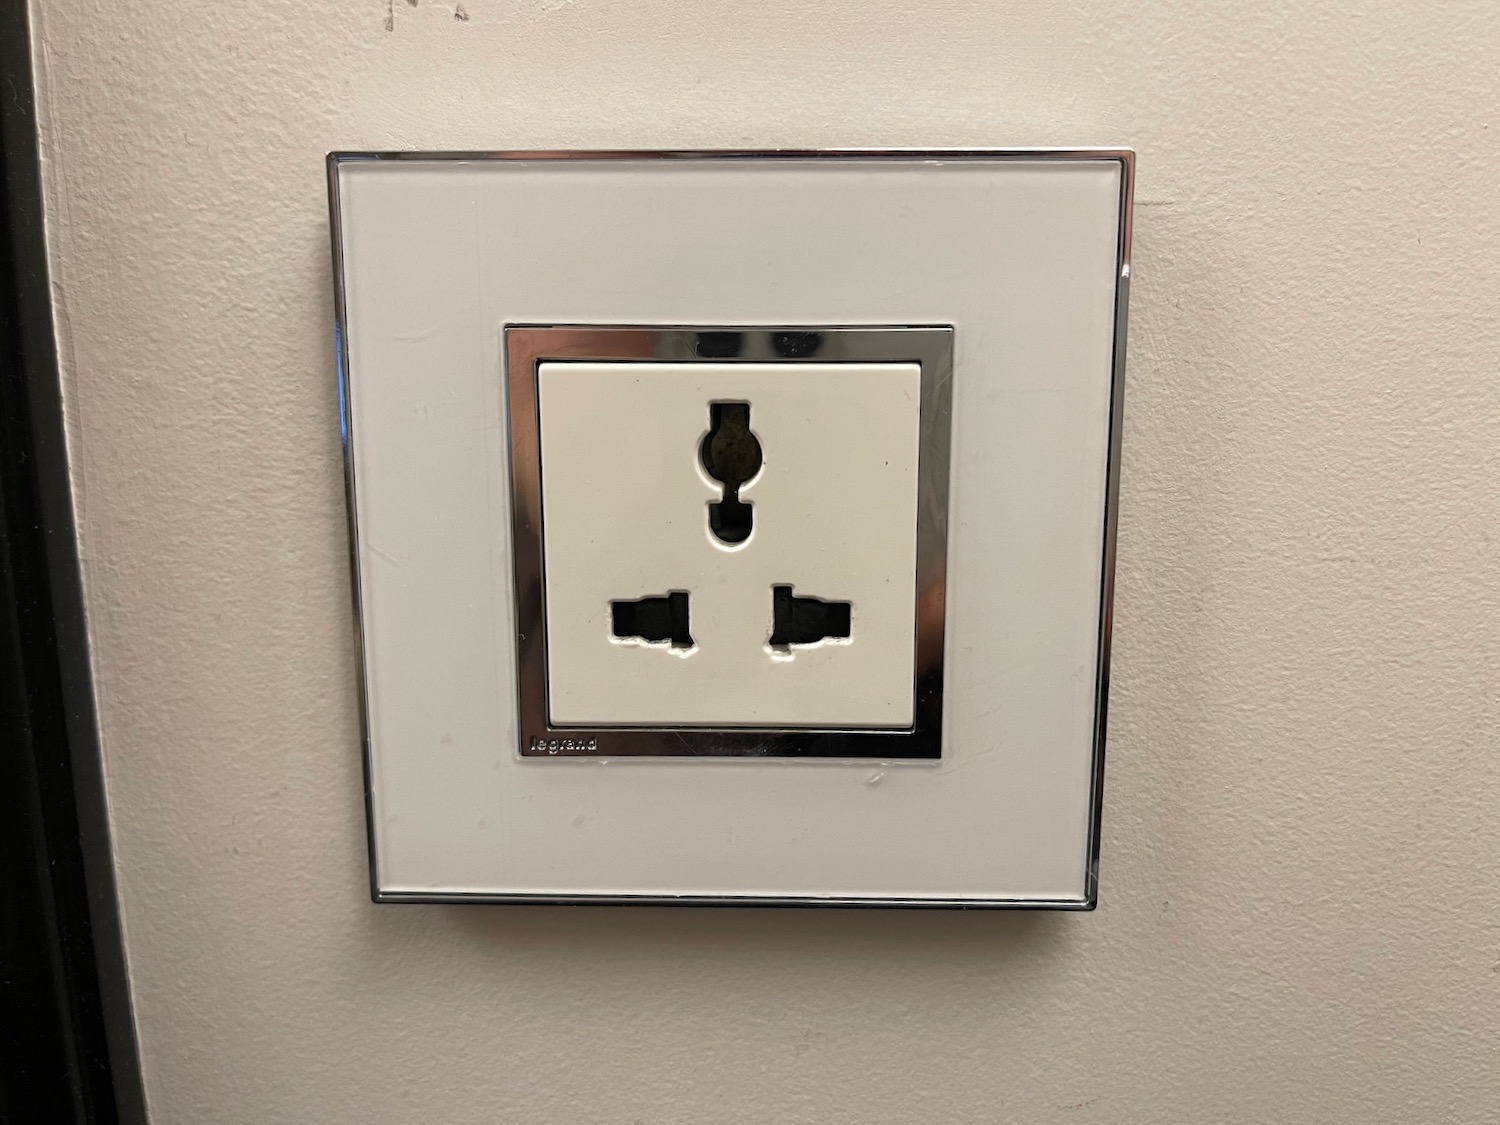 a white wall outlet with silver trim